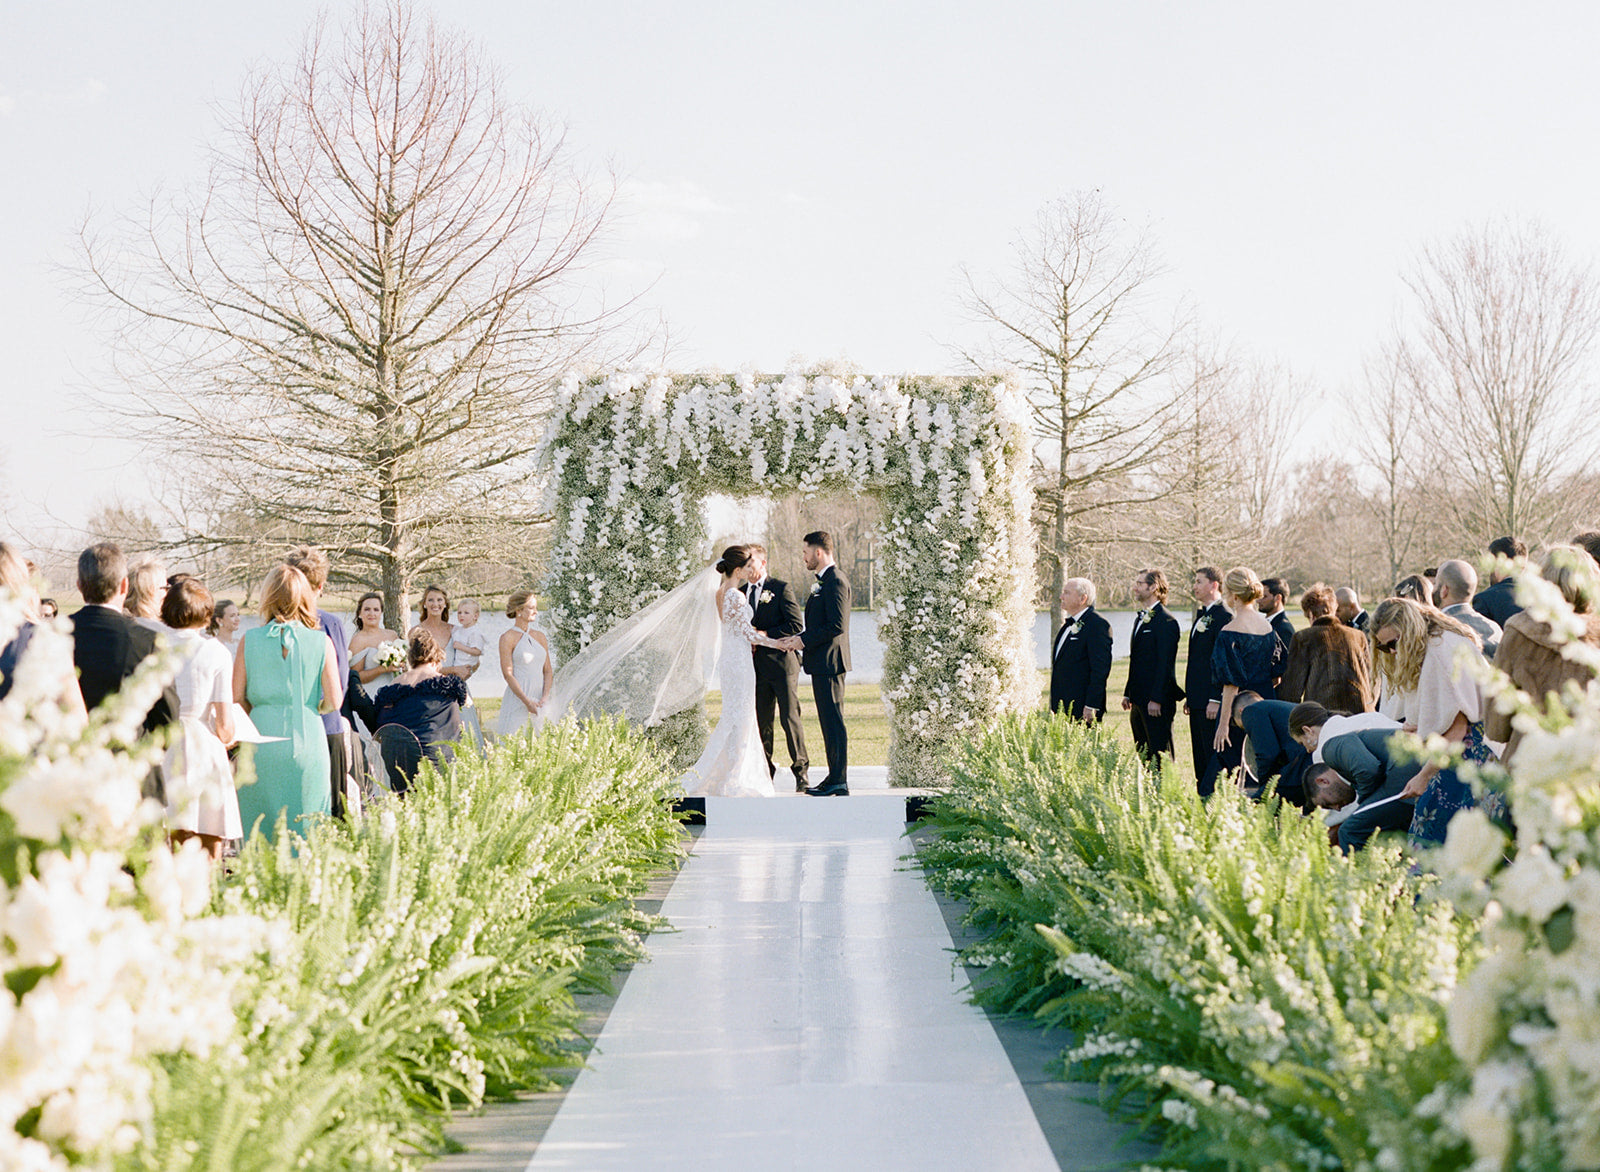 Photo of a bridge and groom standing beneath a square arch made of greenery and flowers in front of a large audience of wedding guests